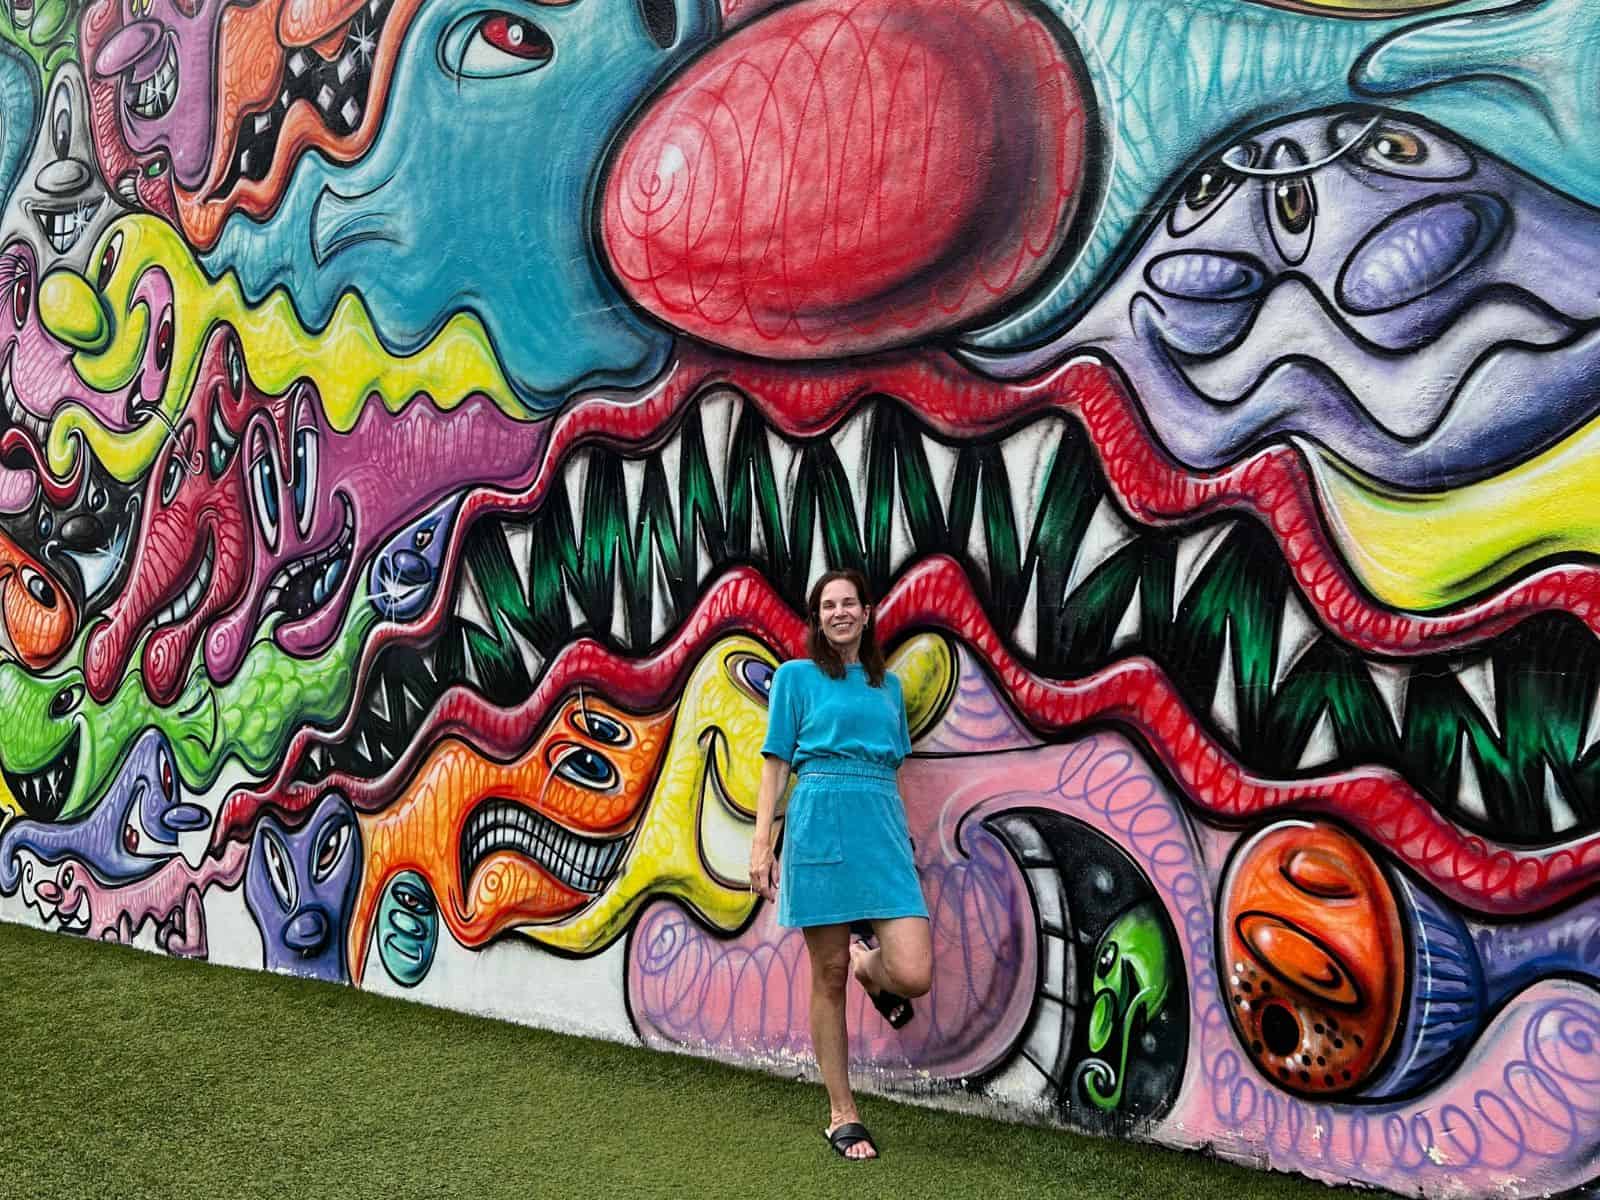 Best things to do in Miami Florida - Julie Middlebrook - Julie at Wynwood Walls